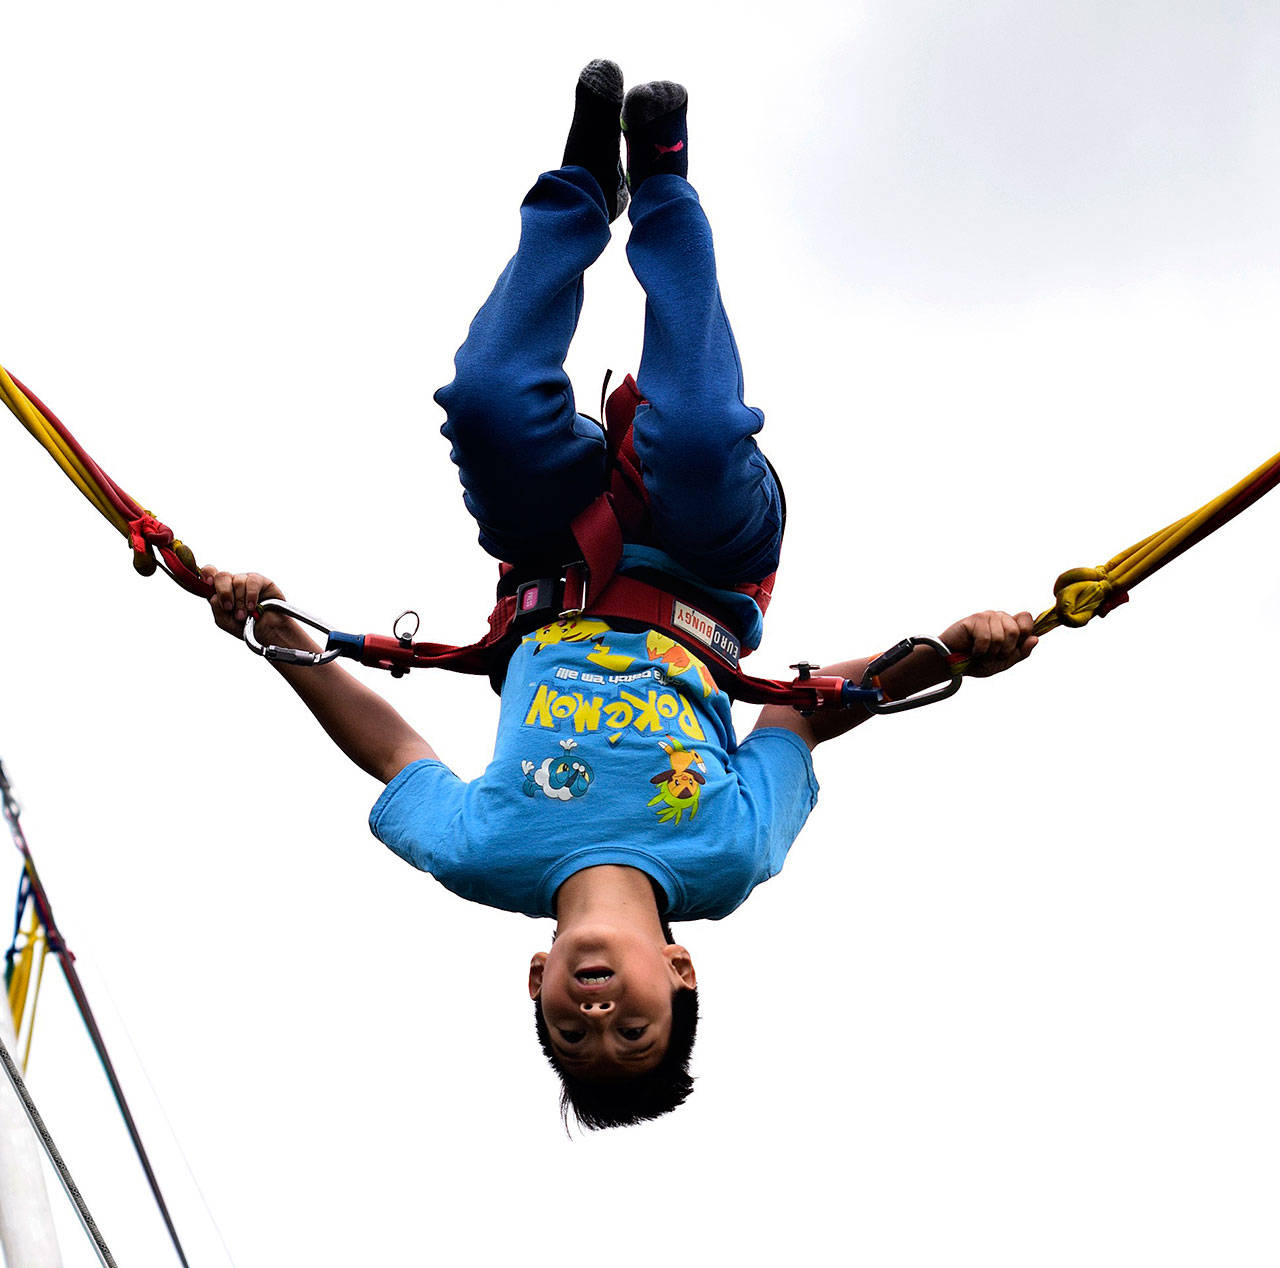 Christian Cordova, 10, does flips on the bungee trampoline during Kids Day at Les Gove Park. RACHEL CIAMPI, Auburn Reporter